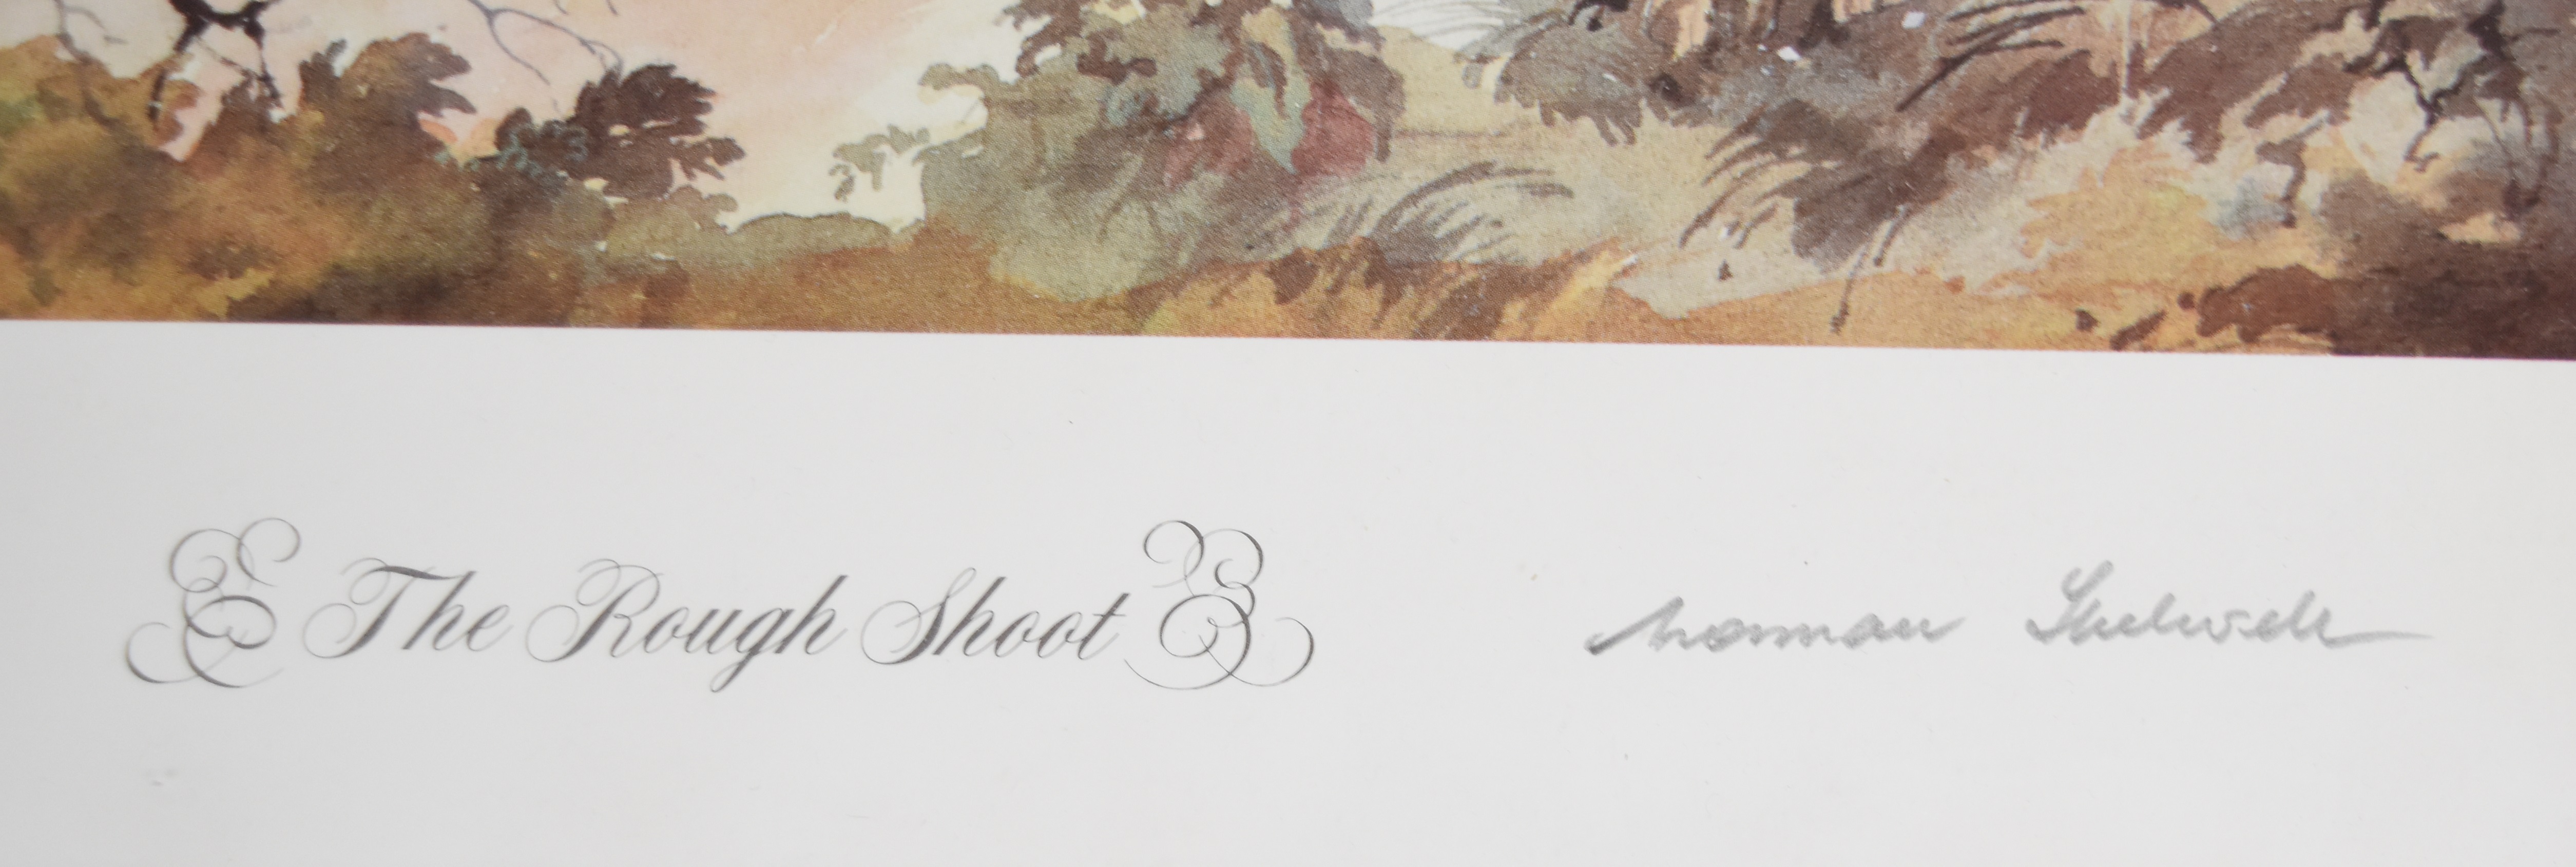 Two Norman Thelwell signed limited edition of 850 prints 'The Smooth Shoot' and 'The Royal Shoot', - Image 8 of 10